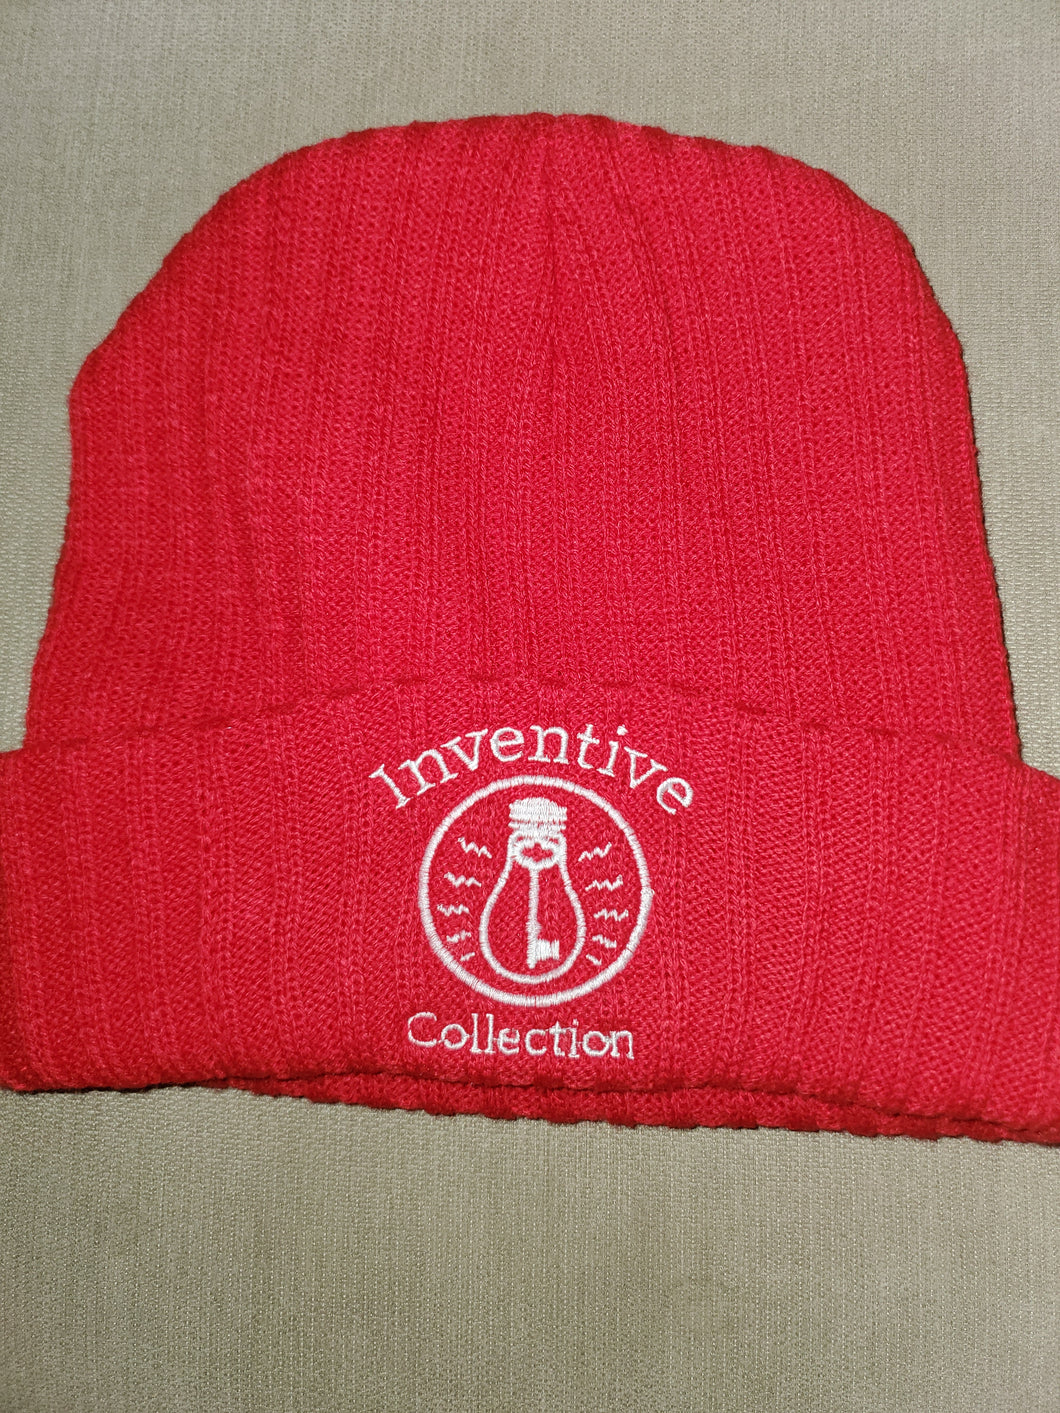 Inventive Collection beanie